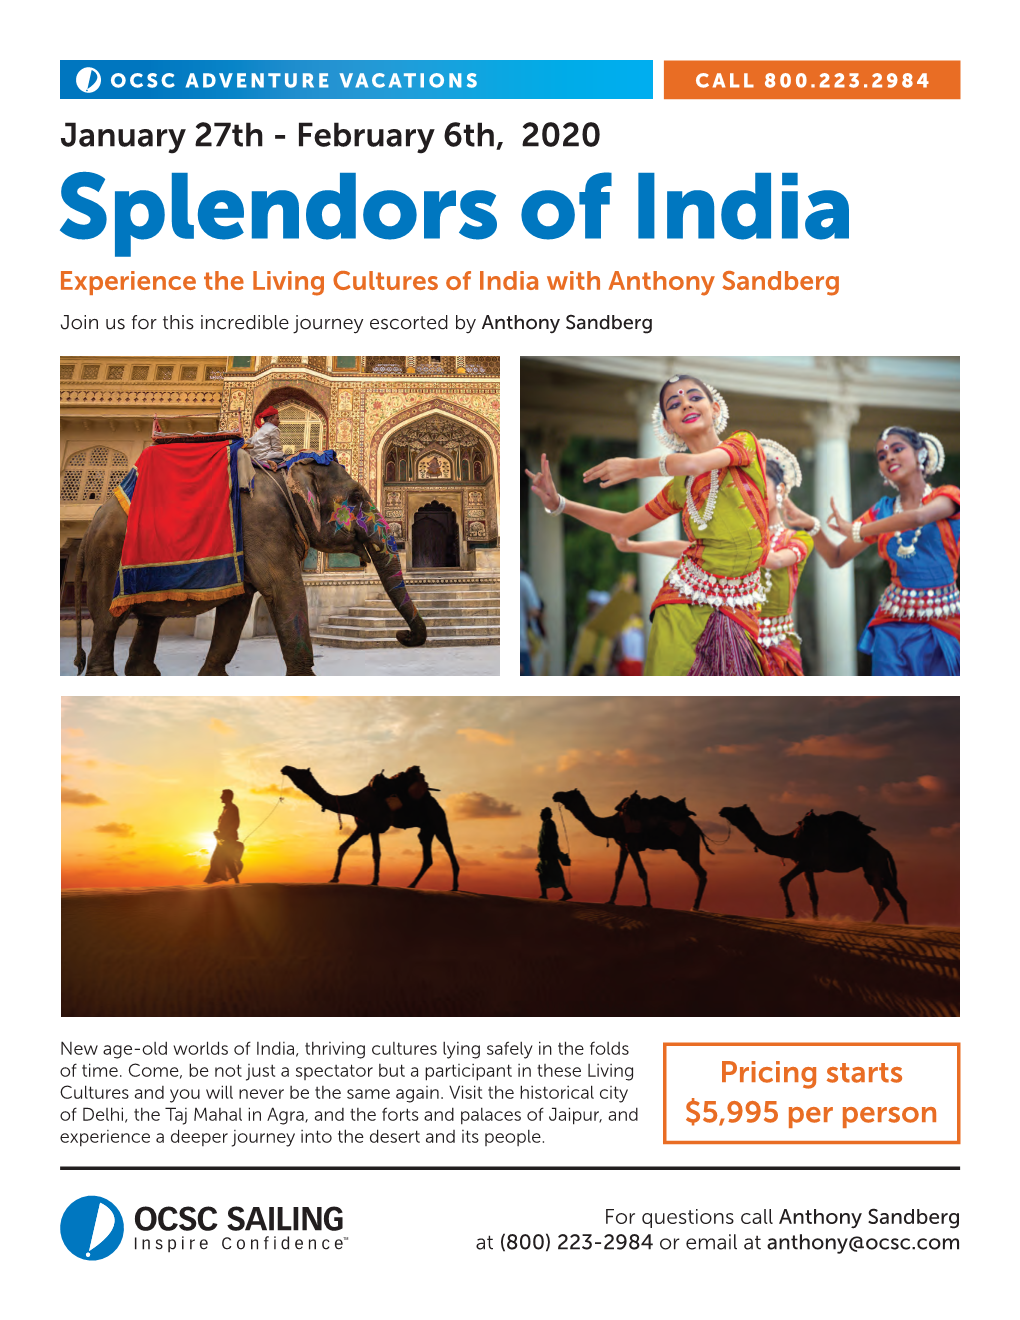 Splendors of India Experience the Living Cultures of India with Anthony Sandberg Join Us for This Incredible Journey Escorted by Anthony Sandberg